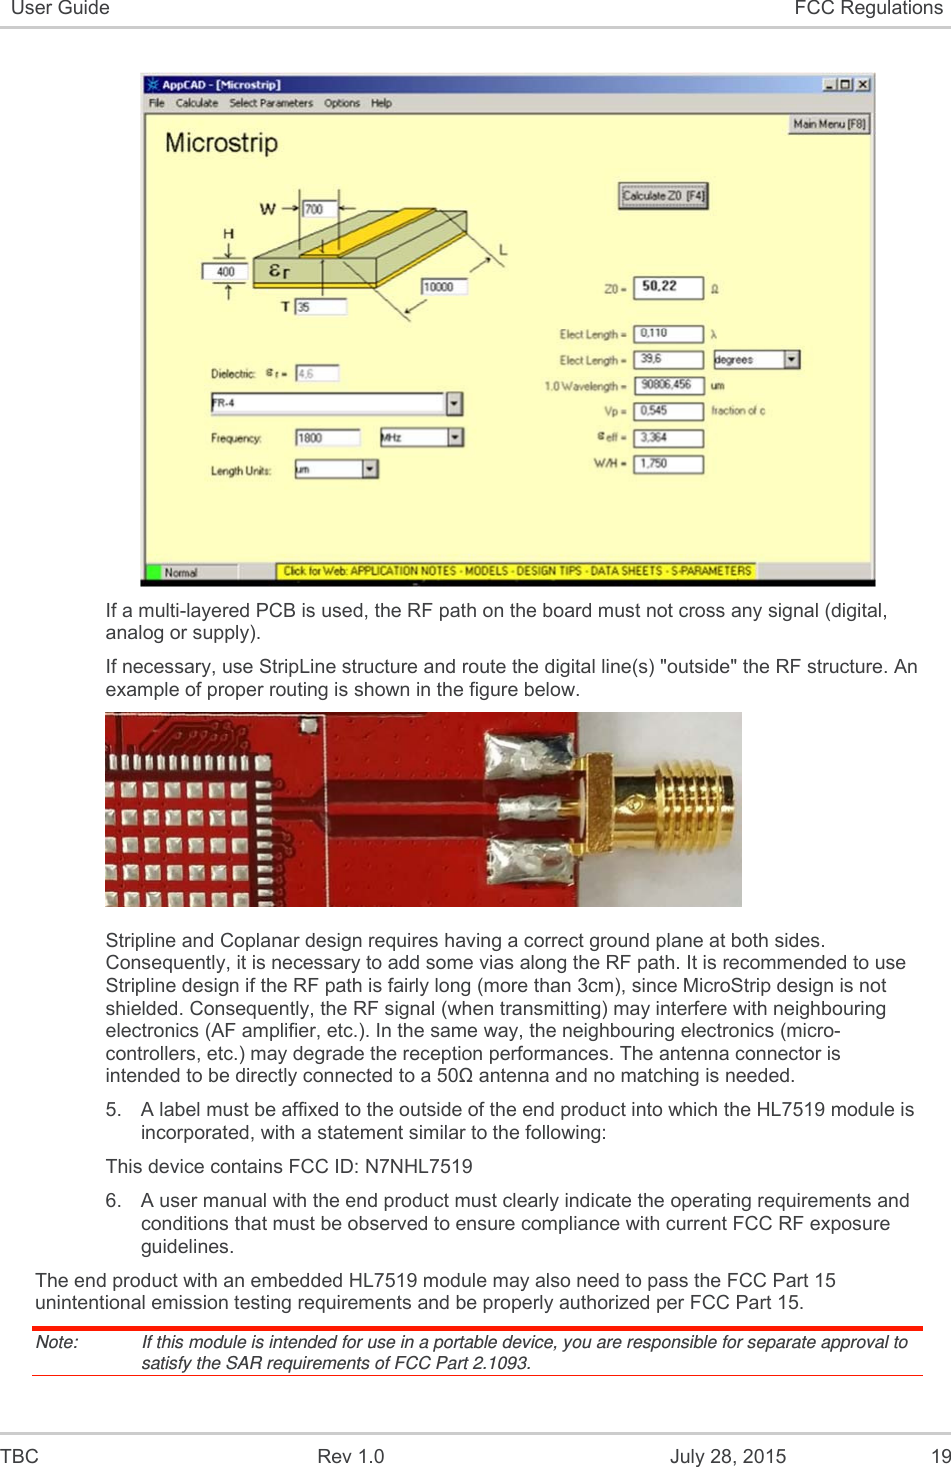  TBC  Rev 1.0  July 28, 2015  19 User Guide  FCC Regulations   If a multi-layered PCB is used, the RF path on the board must not cross any signal (digital, analog or supply).  If necessary, use StripLine structure and route the digital line(s) &quot;outside&quot; the RF structure. An example of proper routing is shown in the figure below.   Stripline and Coplanar design requires having a correct ground plane at both sides. Consequently, it is necessary to add some vias along the RF path. It is recommended to use Stripline design if the RF path is fairly long (more than 3cm), since MicroStrip design is not shielded. Consequently, the RF signal (when transmitting) may interfere with neighbouring electronics (AF amplifier, etc.). In the same way, the neighbouring electronics (micro-controllers, etc.) may degrade the reception performances. The antenna connector is intended to be directly connected to a 50Ω antenna and no matching is needed. 5.  A label must be affixed to the outside of the end product into which the HL7519 module is incorporated, with a statement similar to the following: This device contains FCC ID: N7NHL7519  6.  A user manual with the end product must clearly indicate the operating requirements and conditions that must be observed to ensure compliance with current FCC RF exposure guidelines. The end product with an embedded HL7519 module may also need to pass the FCC Part 15 unintentional emission testing requirements and be properly authorized per FCC Part 15. Note:   If this module is intended for use in a portable device, you are responsible for separate approval to satisfy the SAR requirements of FCC Part 2.1093.  